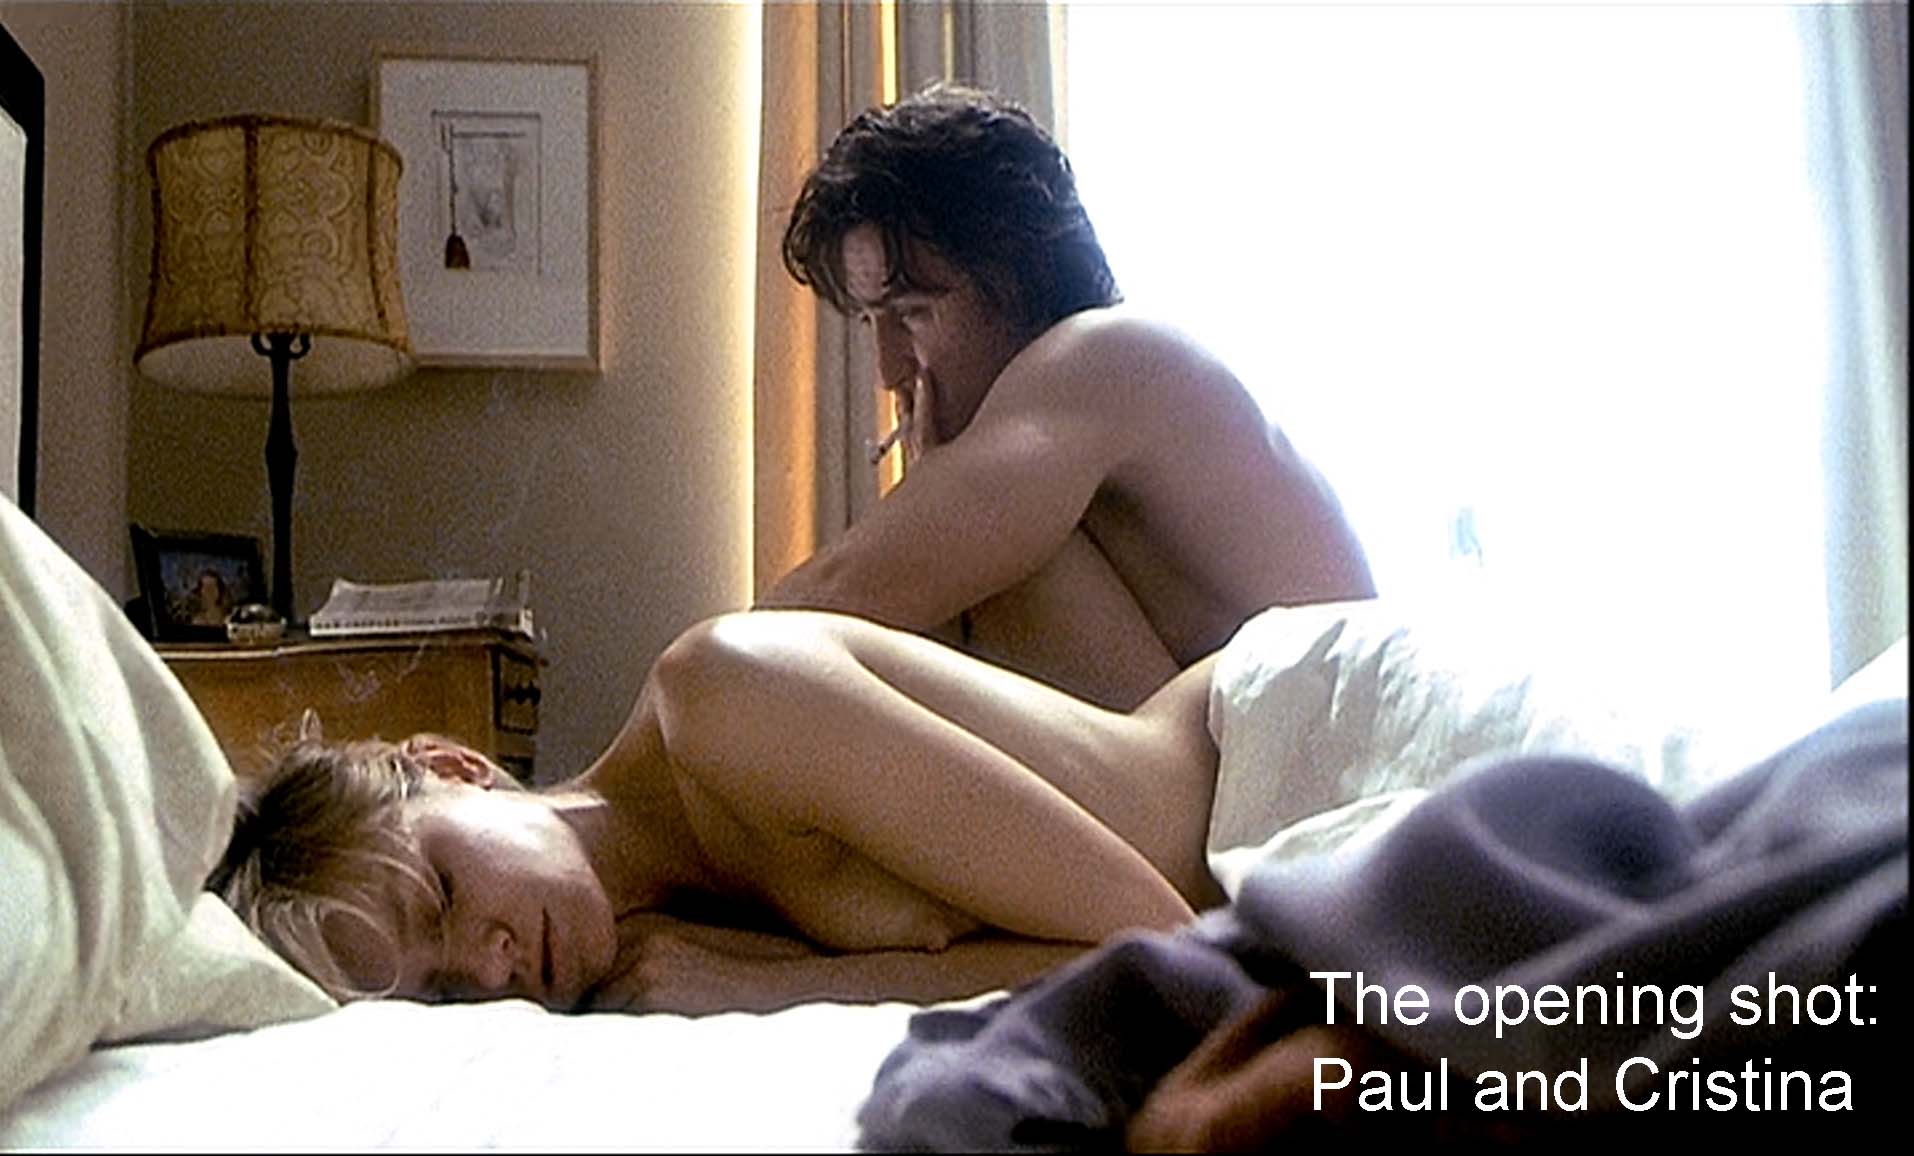 The opening shot: Paul and Cristina